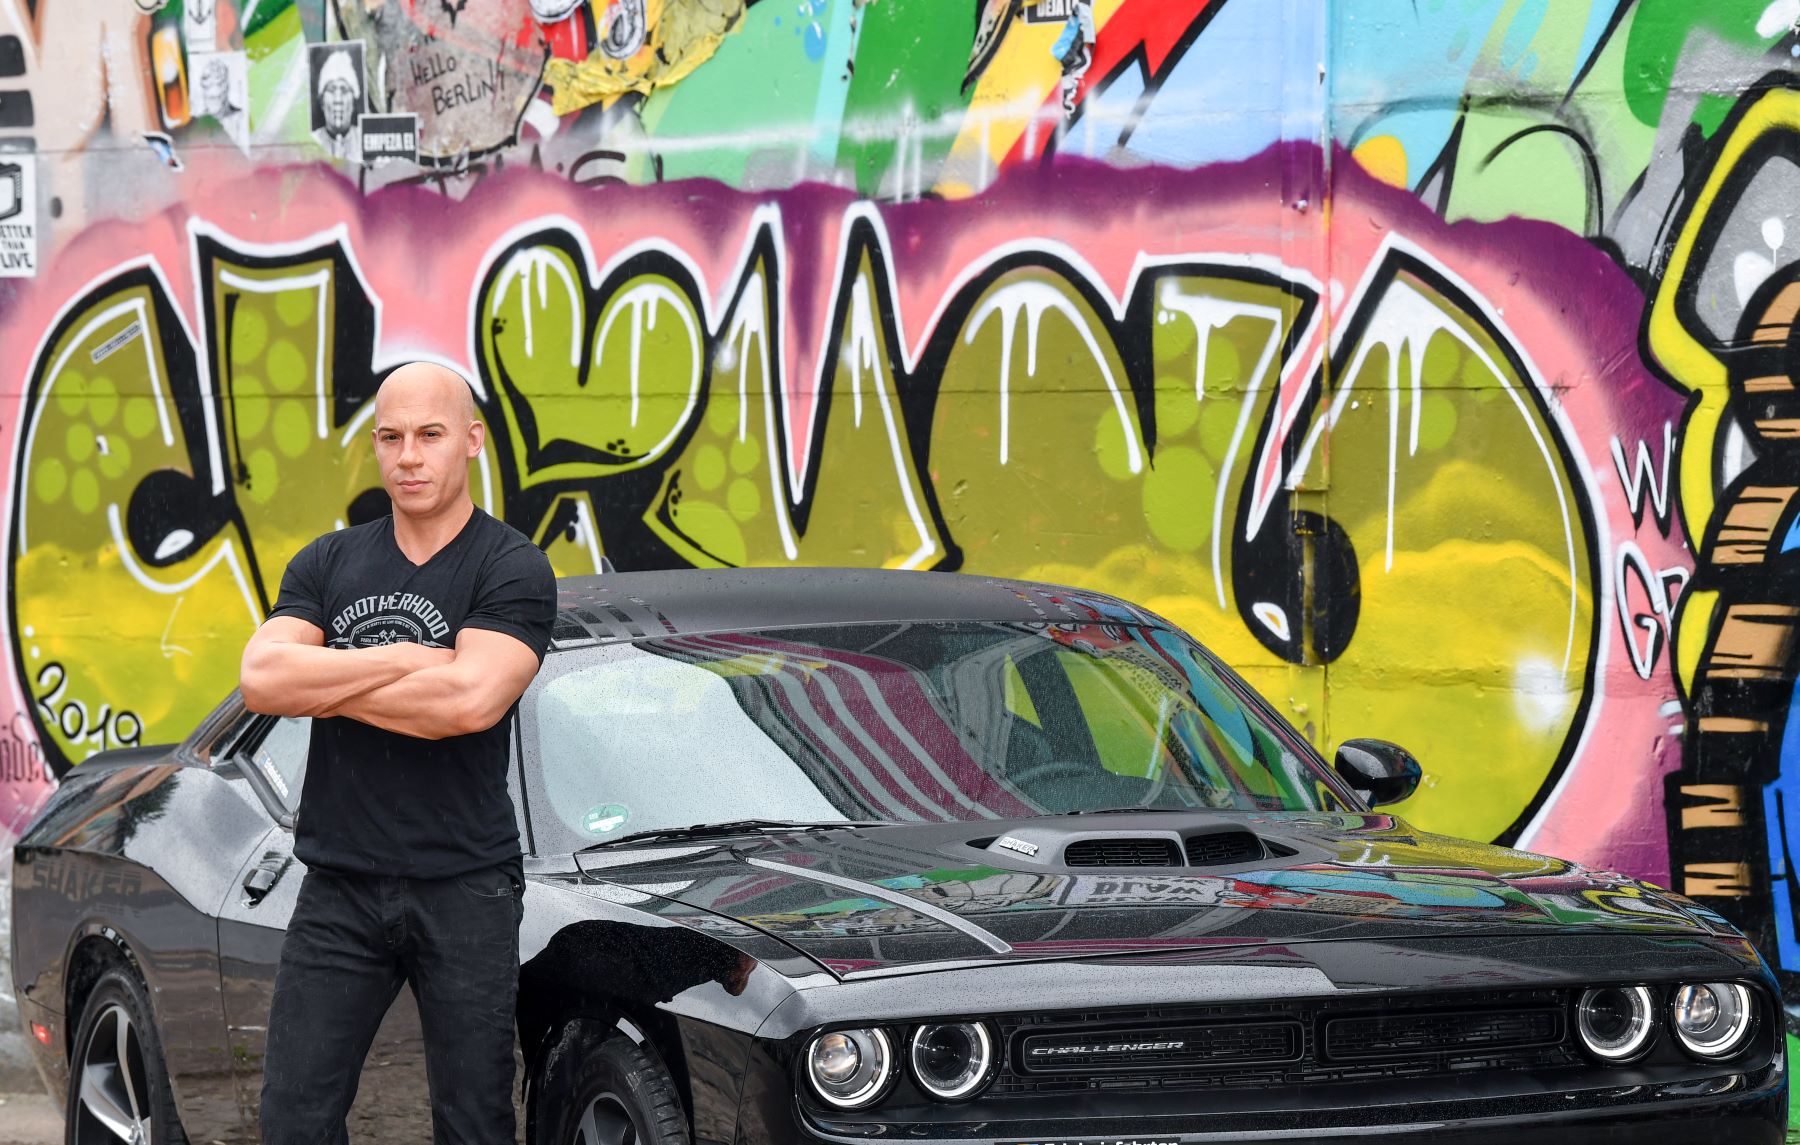 A wax Vin Diesel with his Dodge Challenger muscle car from 'Fast & Furious' seen at Madame Tussauds in Berlin, Germany